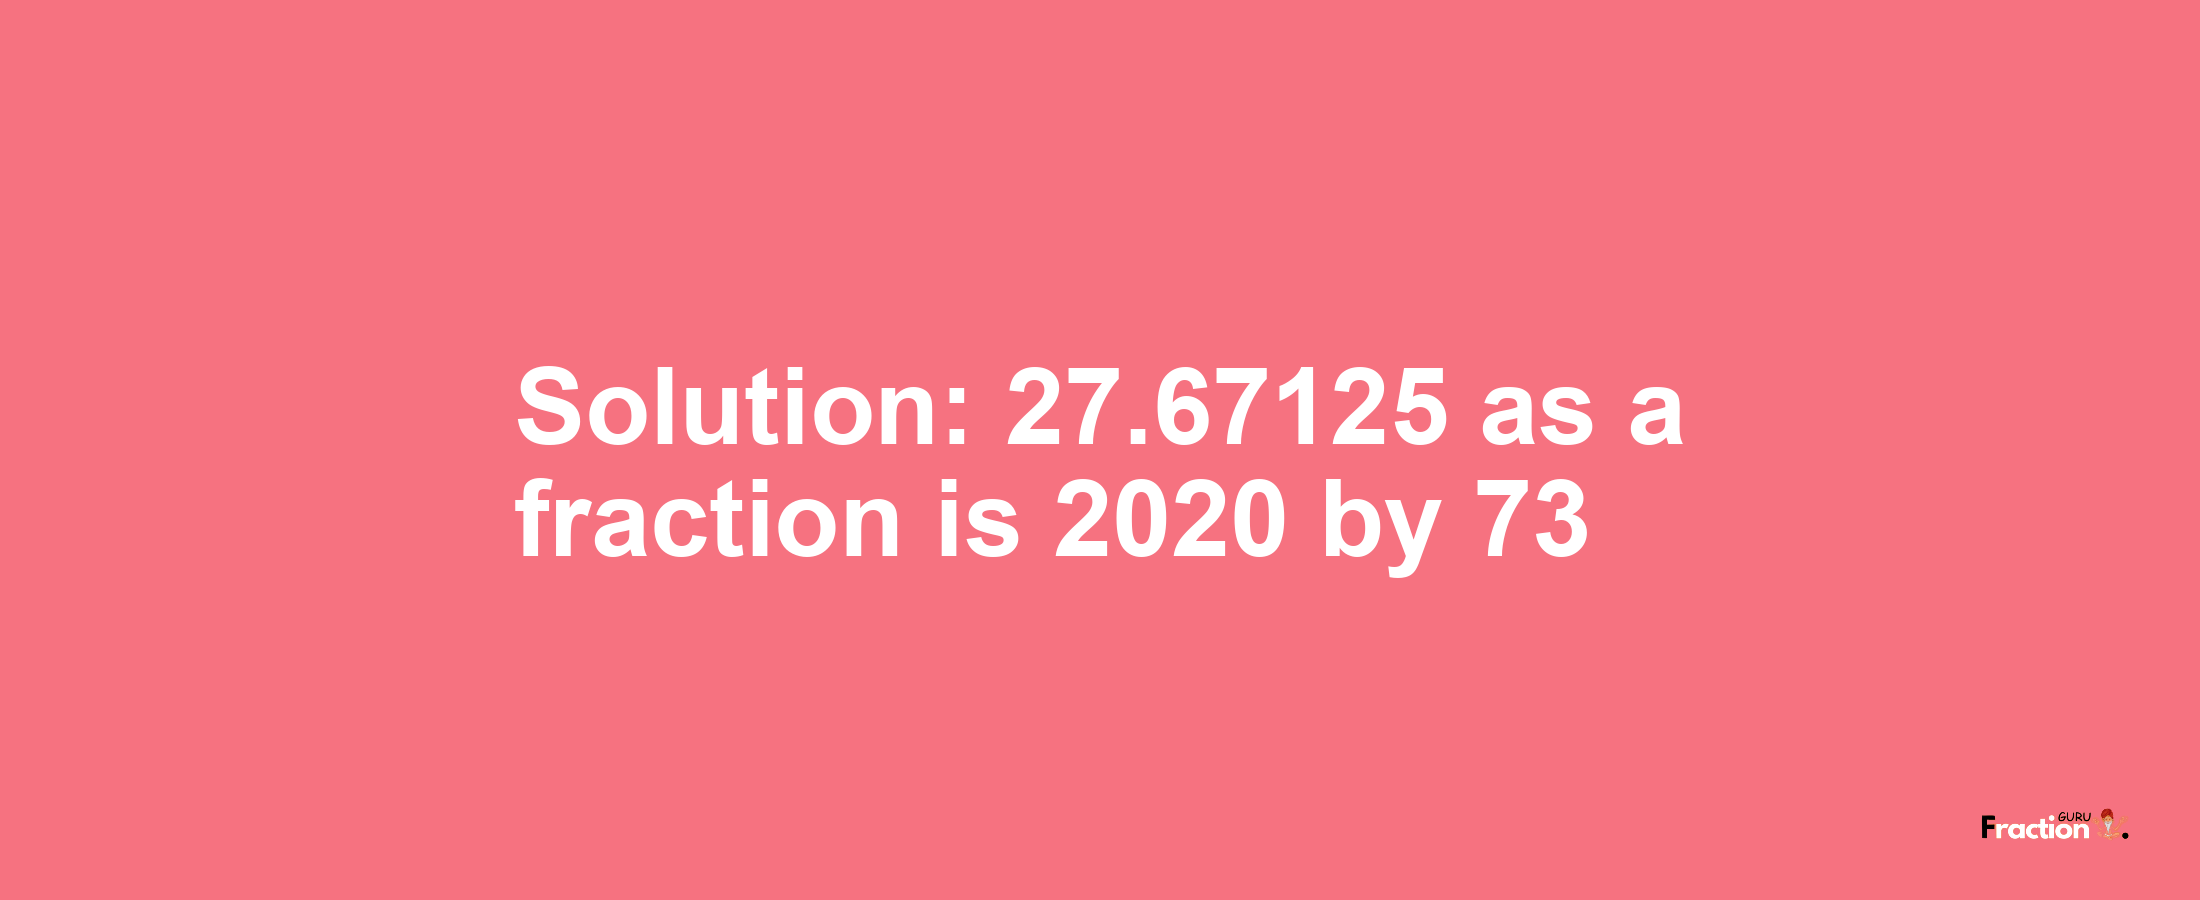 Solution:27.67125 as a fraction is 2020/73